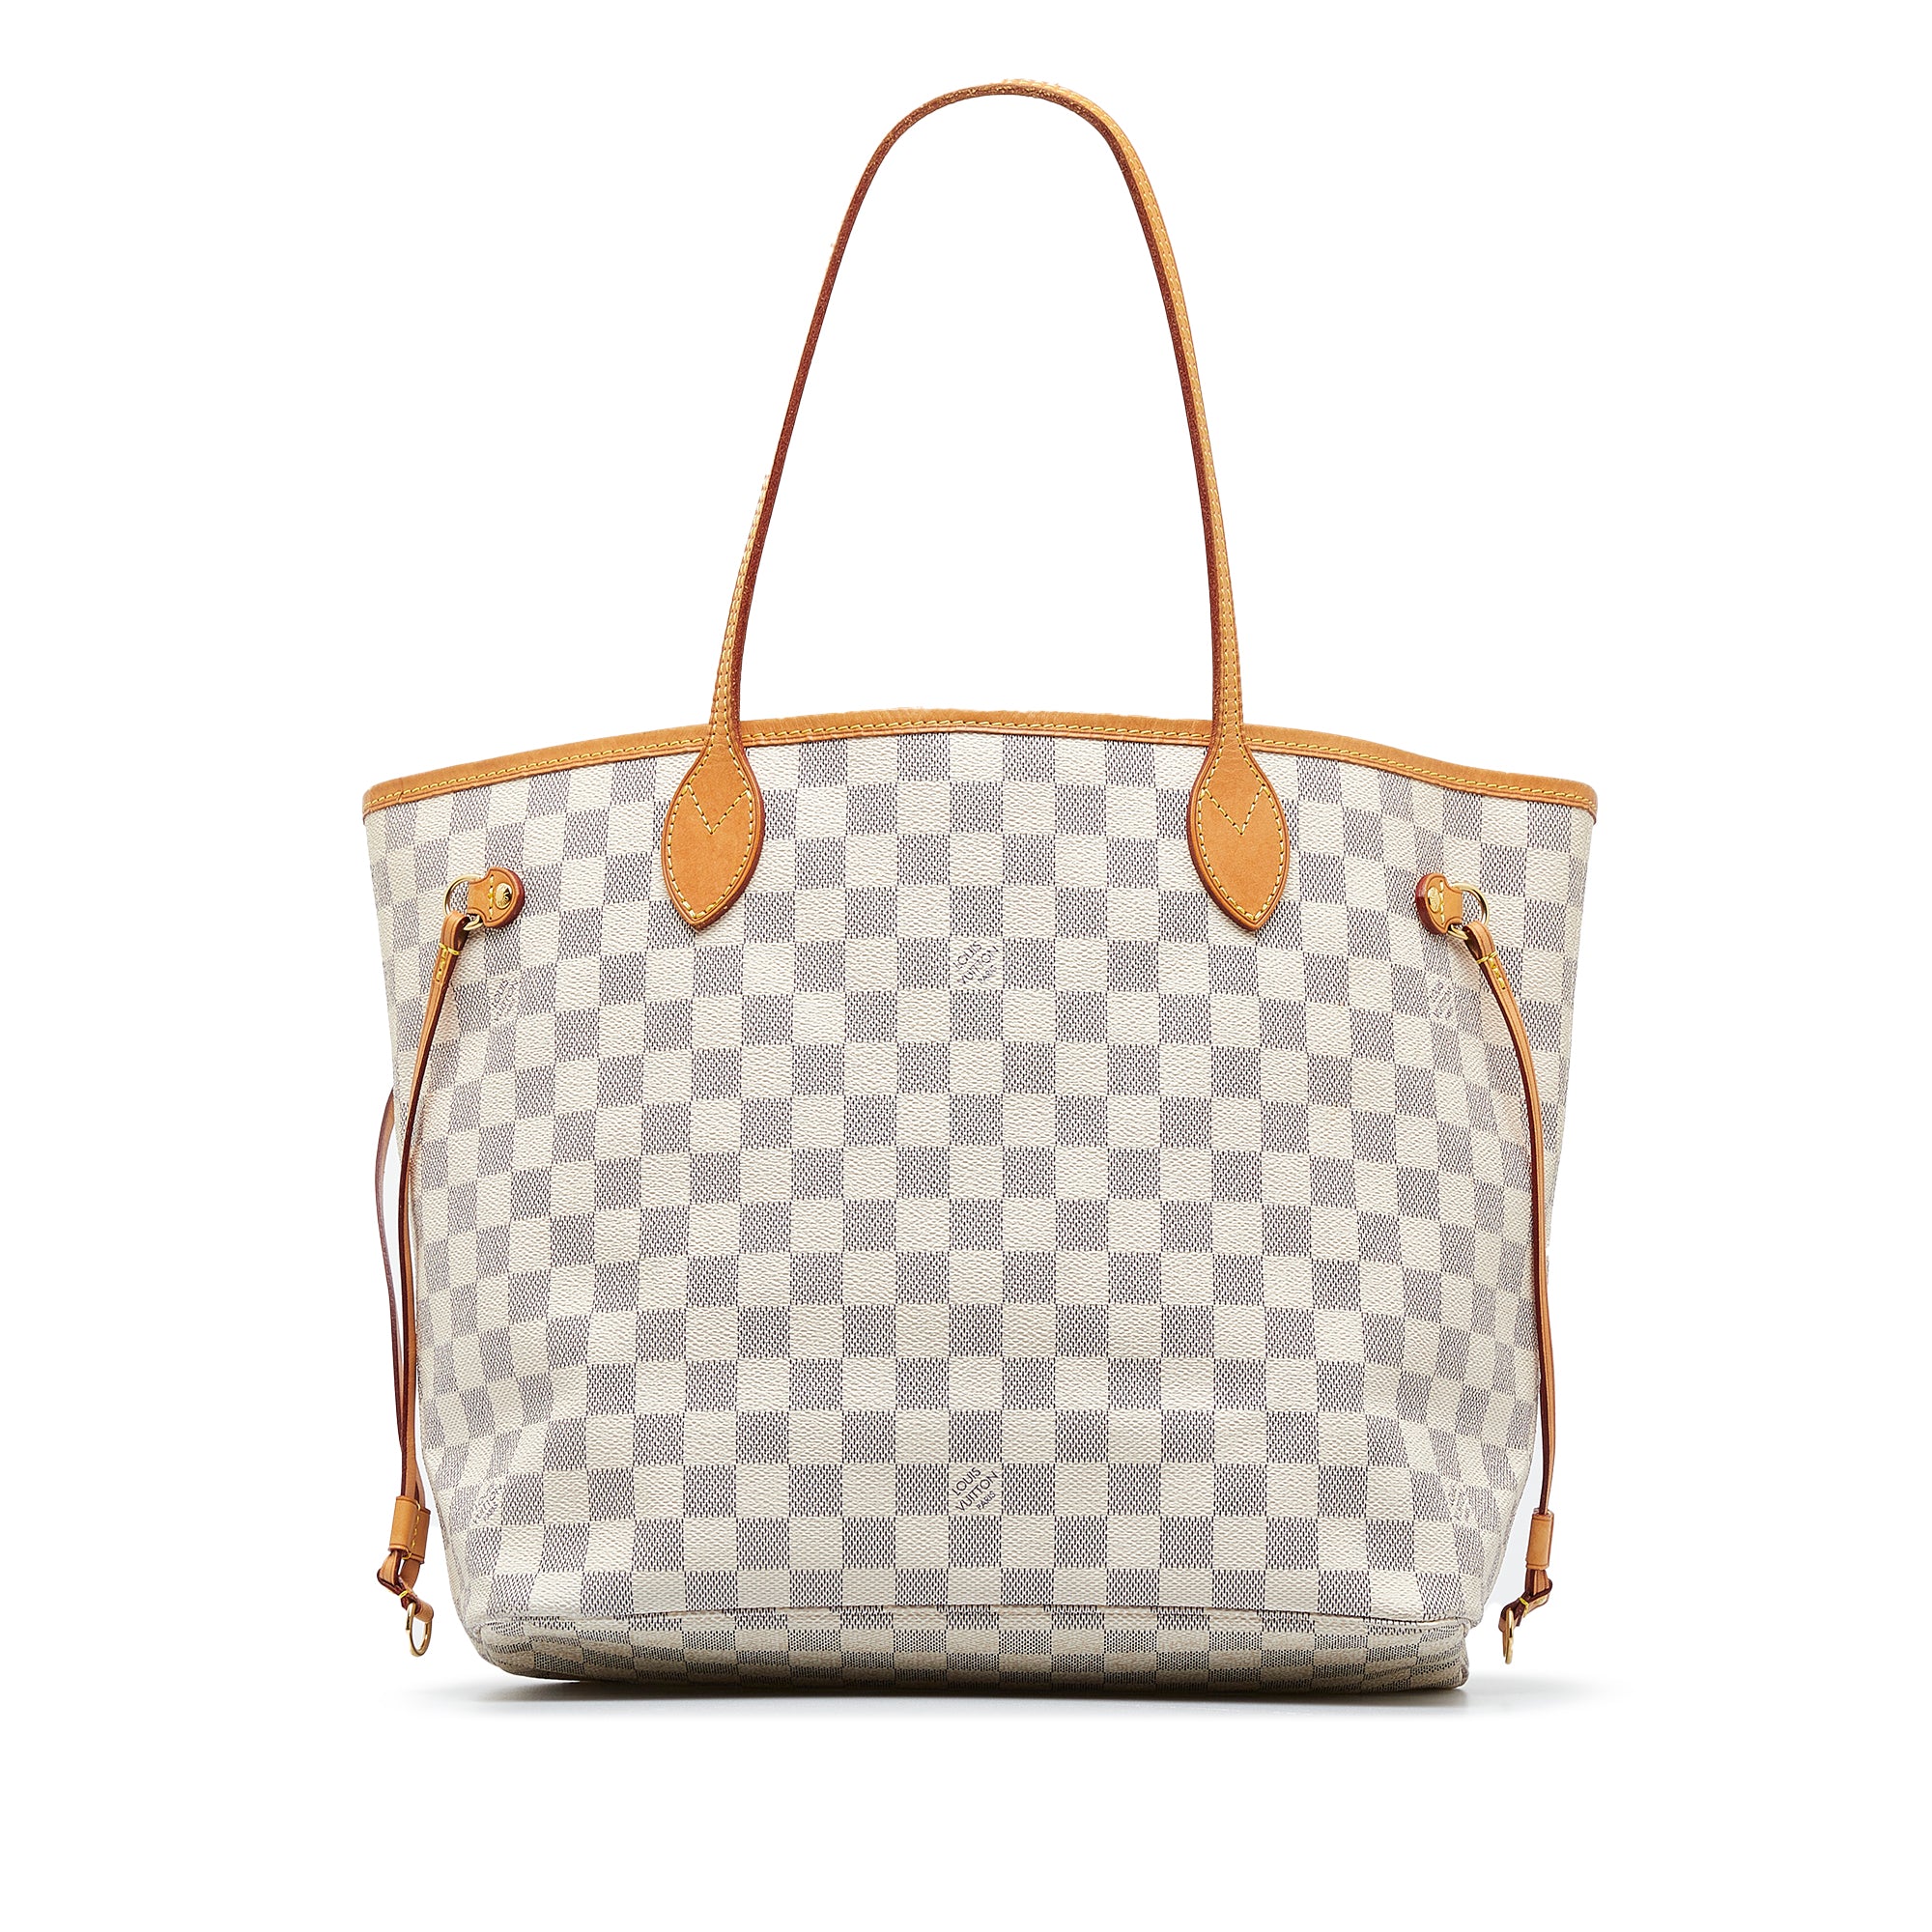 Louis Vuitton - Authenticated Neverfull Handbag - Cotton White For Woman, Good condition